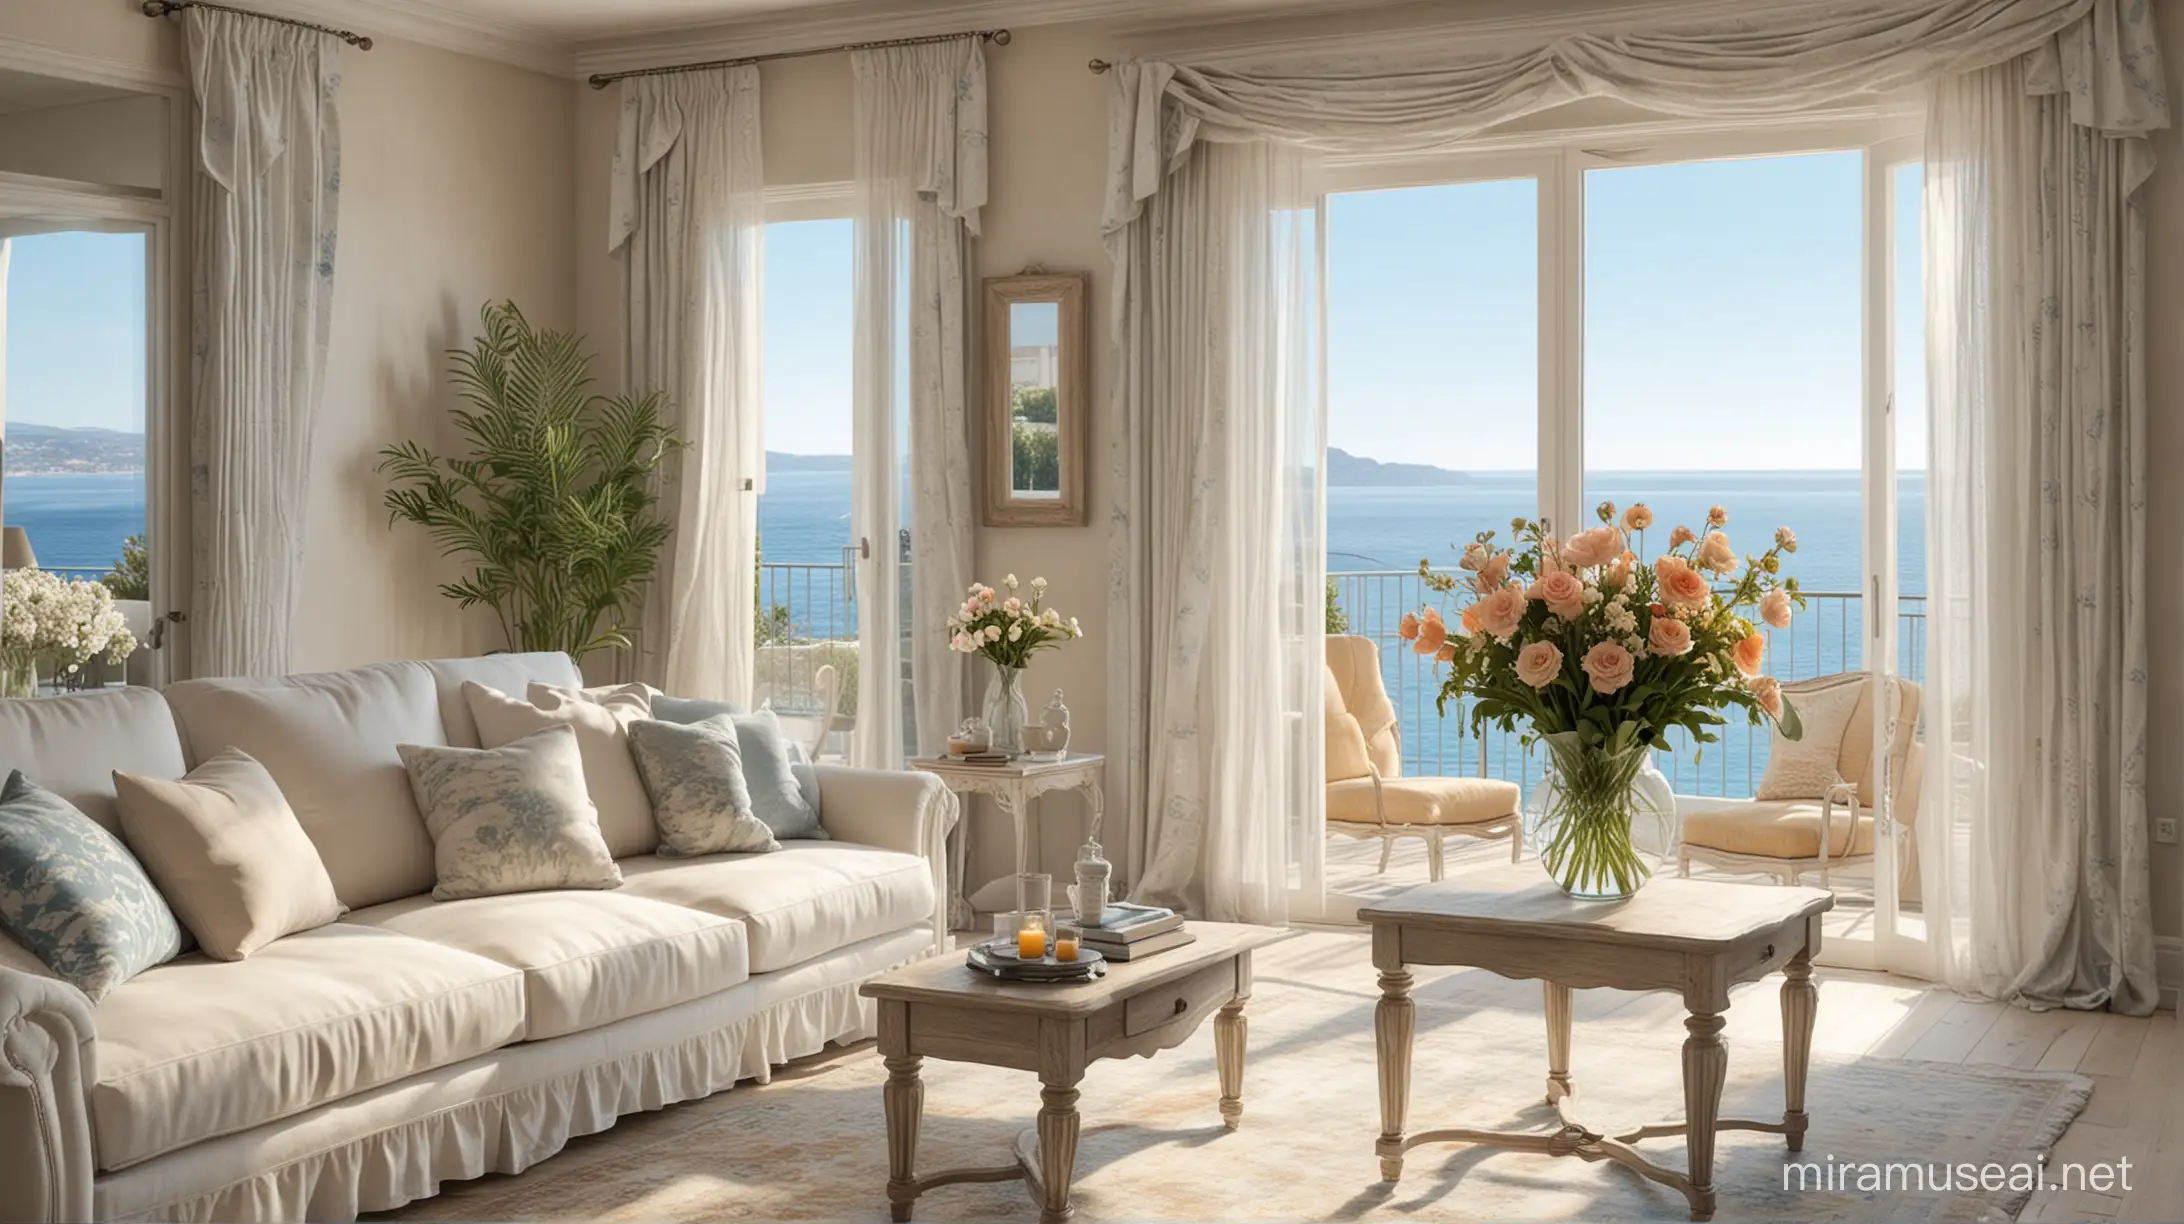 French Riviera Ocean View Interior with Shabby Chic Decor and Fresh Flowers